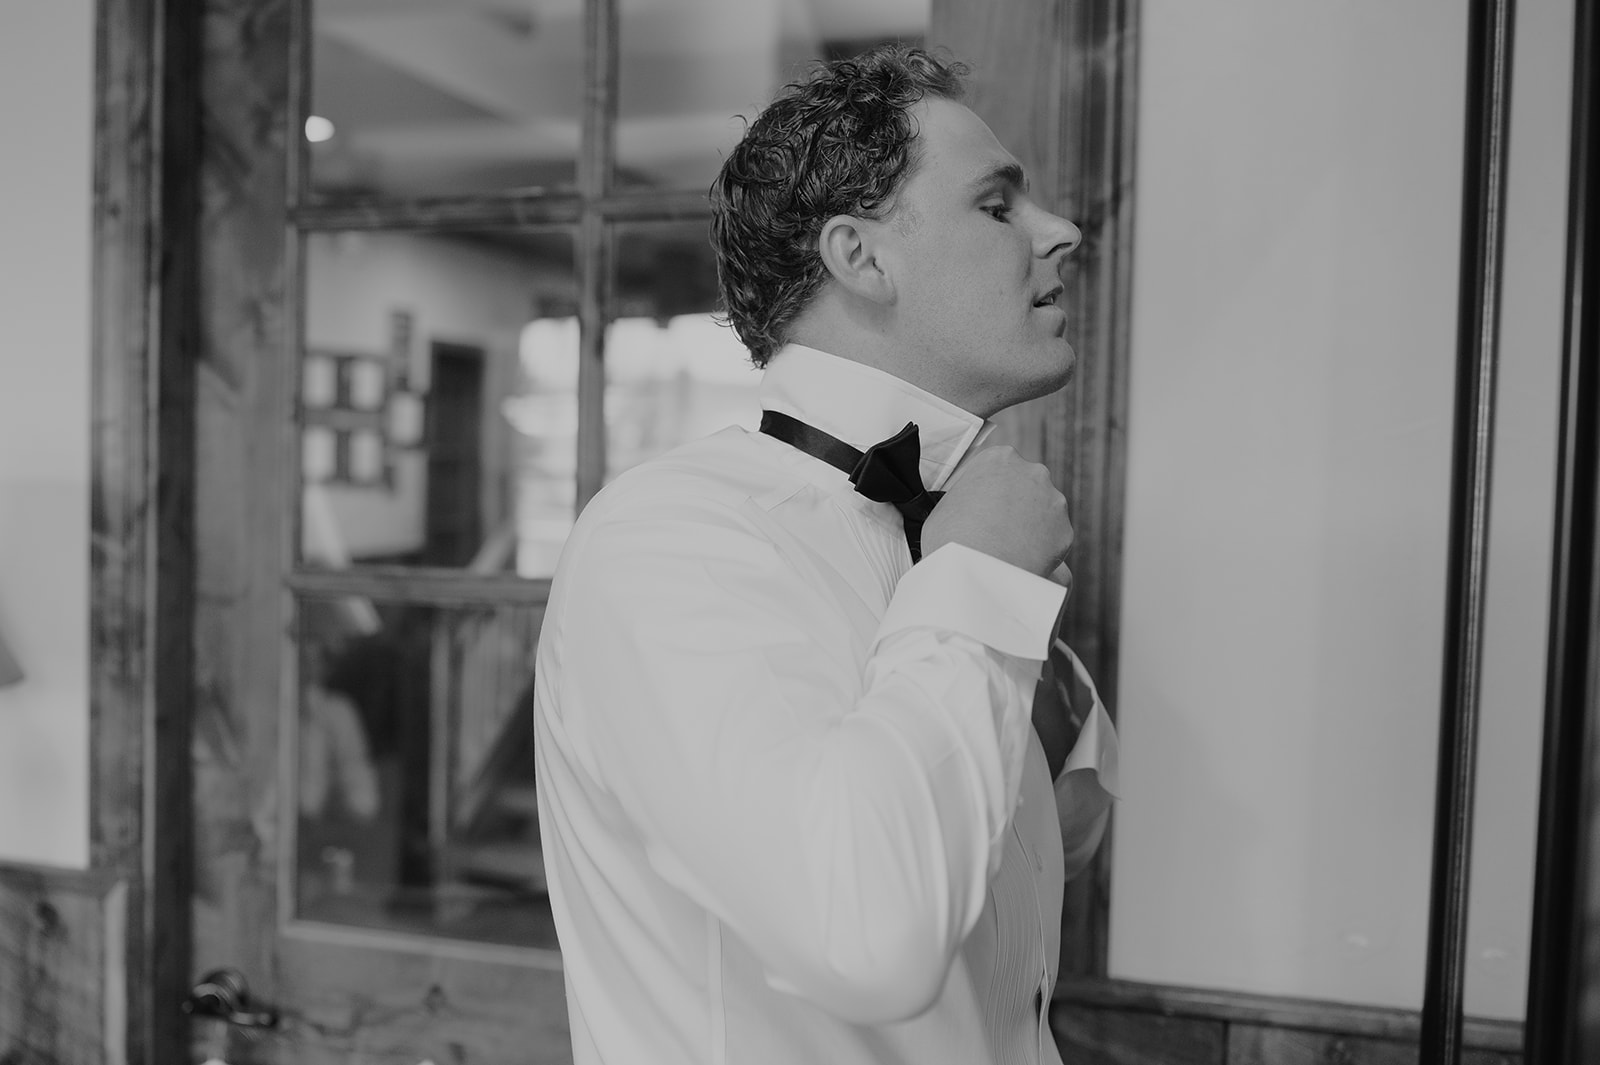 Groom fixing his tie as he gets ready.